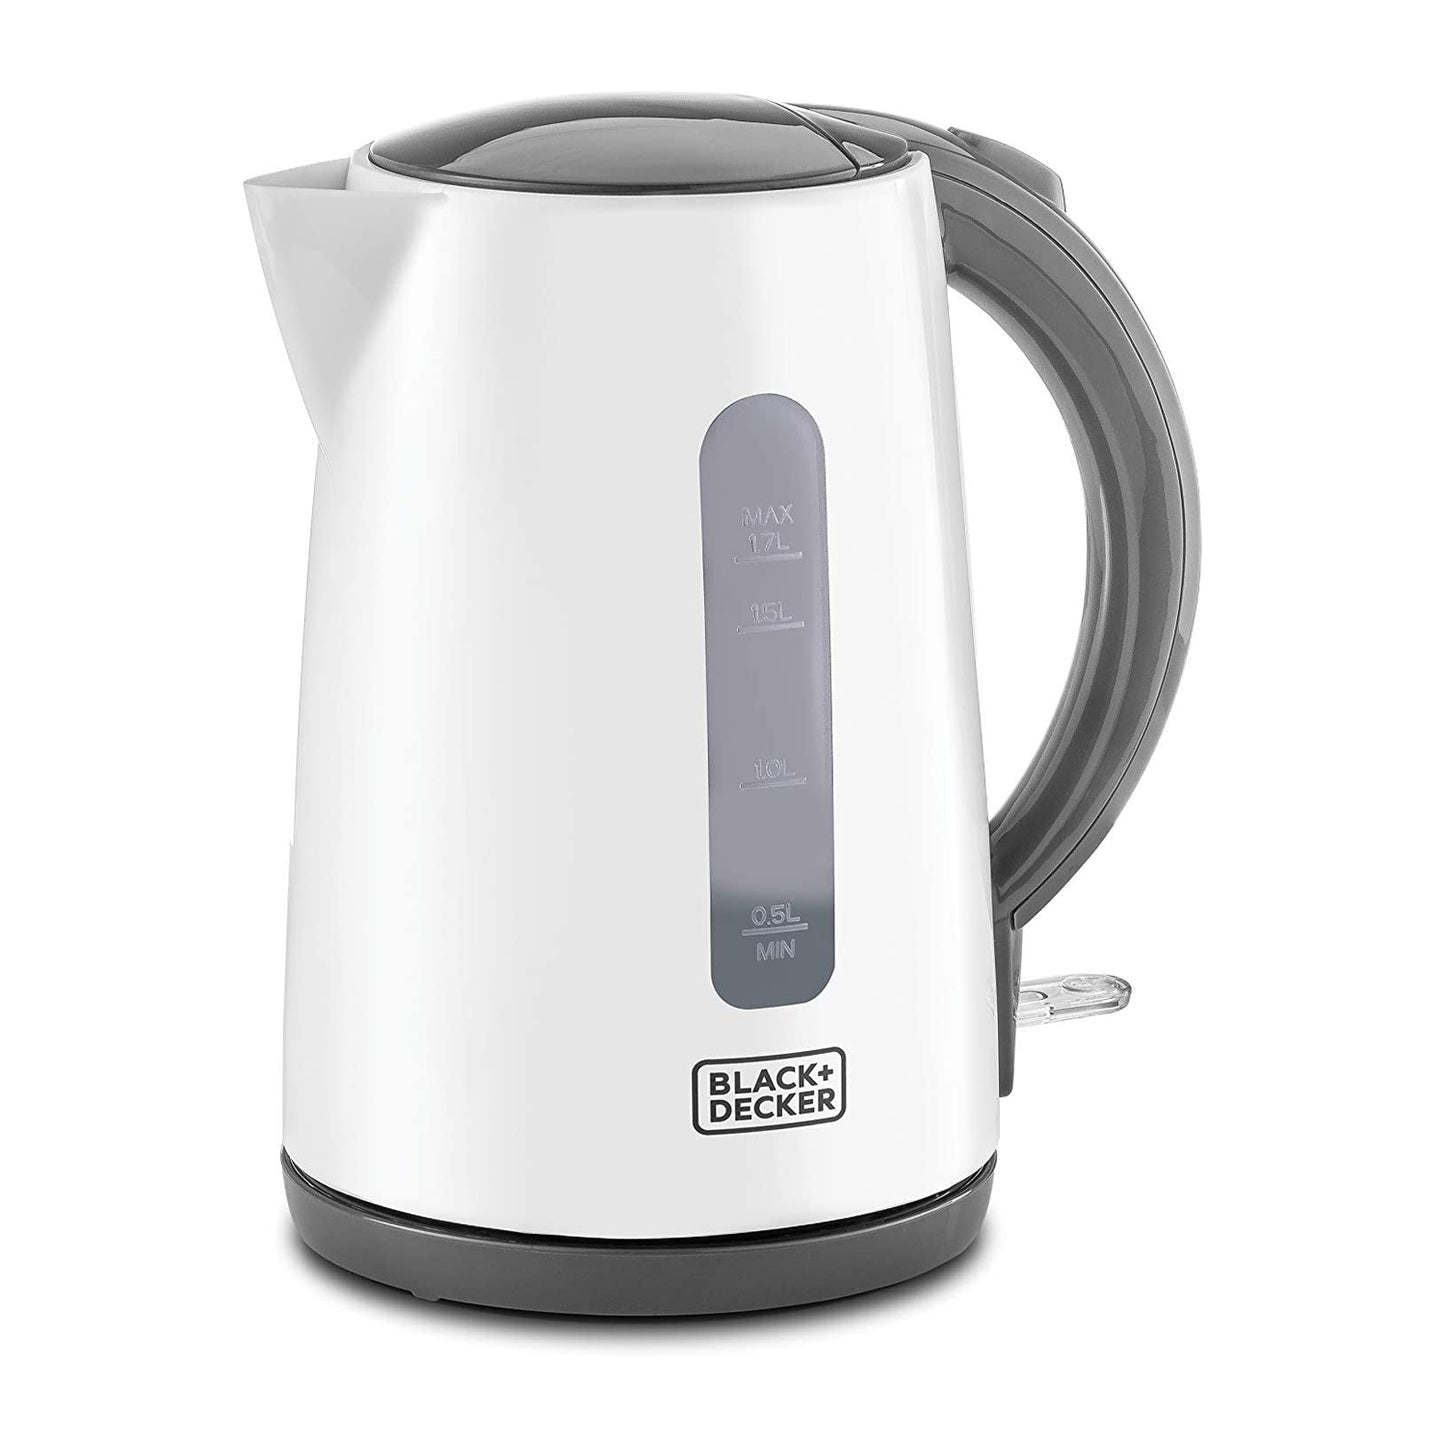 BLACK+DECKER 2200W 1.7L Cordless Electric Kettle With Water-Level Indicator, Removable Filter, Auto Shut-Off And BPA Free, Perfect for Warm Beverages JC70 2 Years Warranty